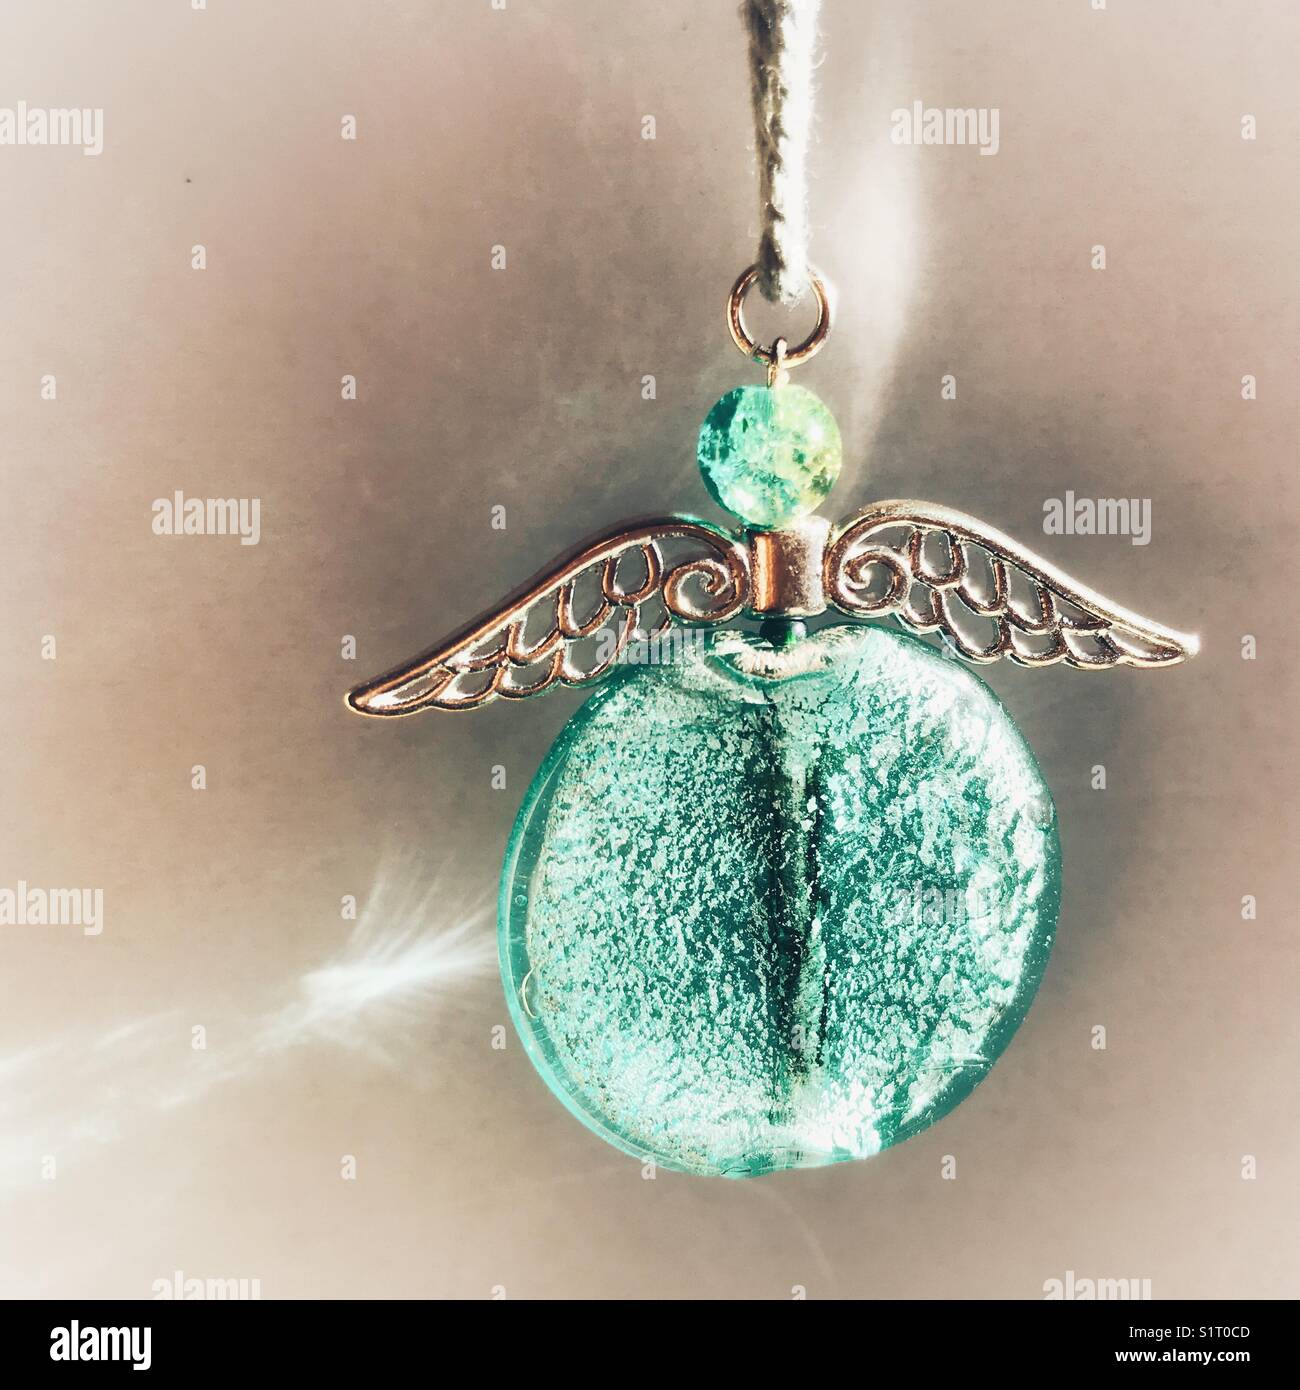 Handmade Christmas ornament, angel,  made from glass beads and metal wings Stock Photo